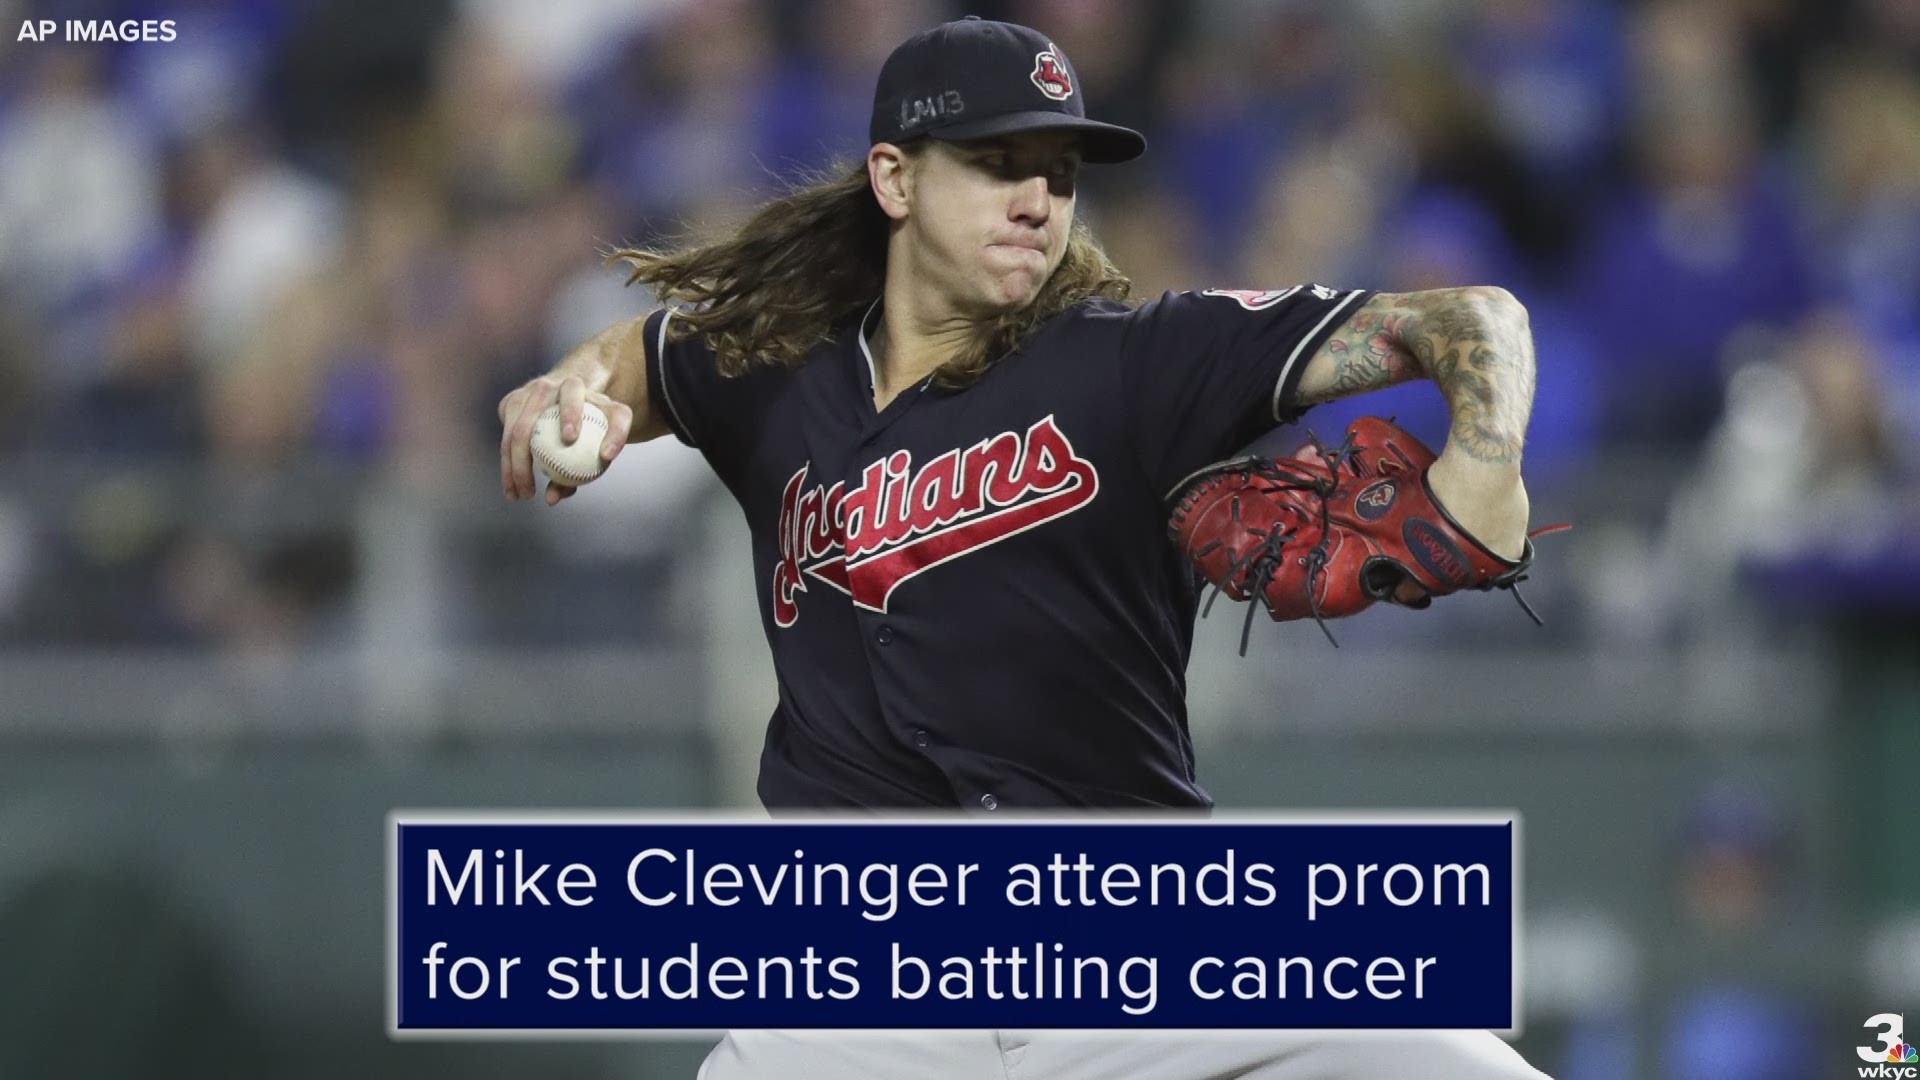 On Saturday, Cleveland Indians pitcher Mike Clevinger attended 'A Prom to Remember.'